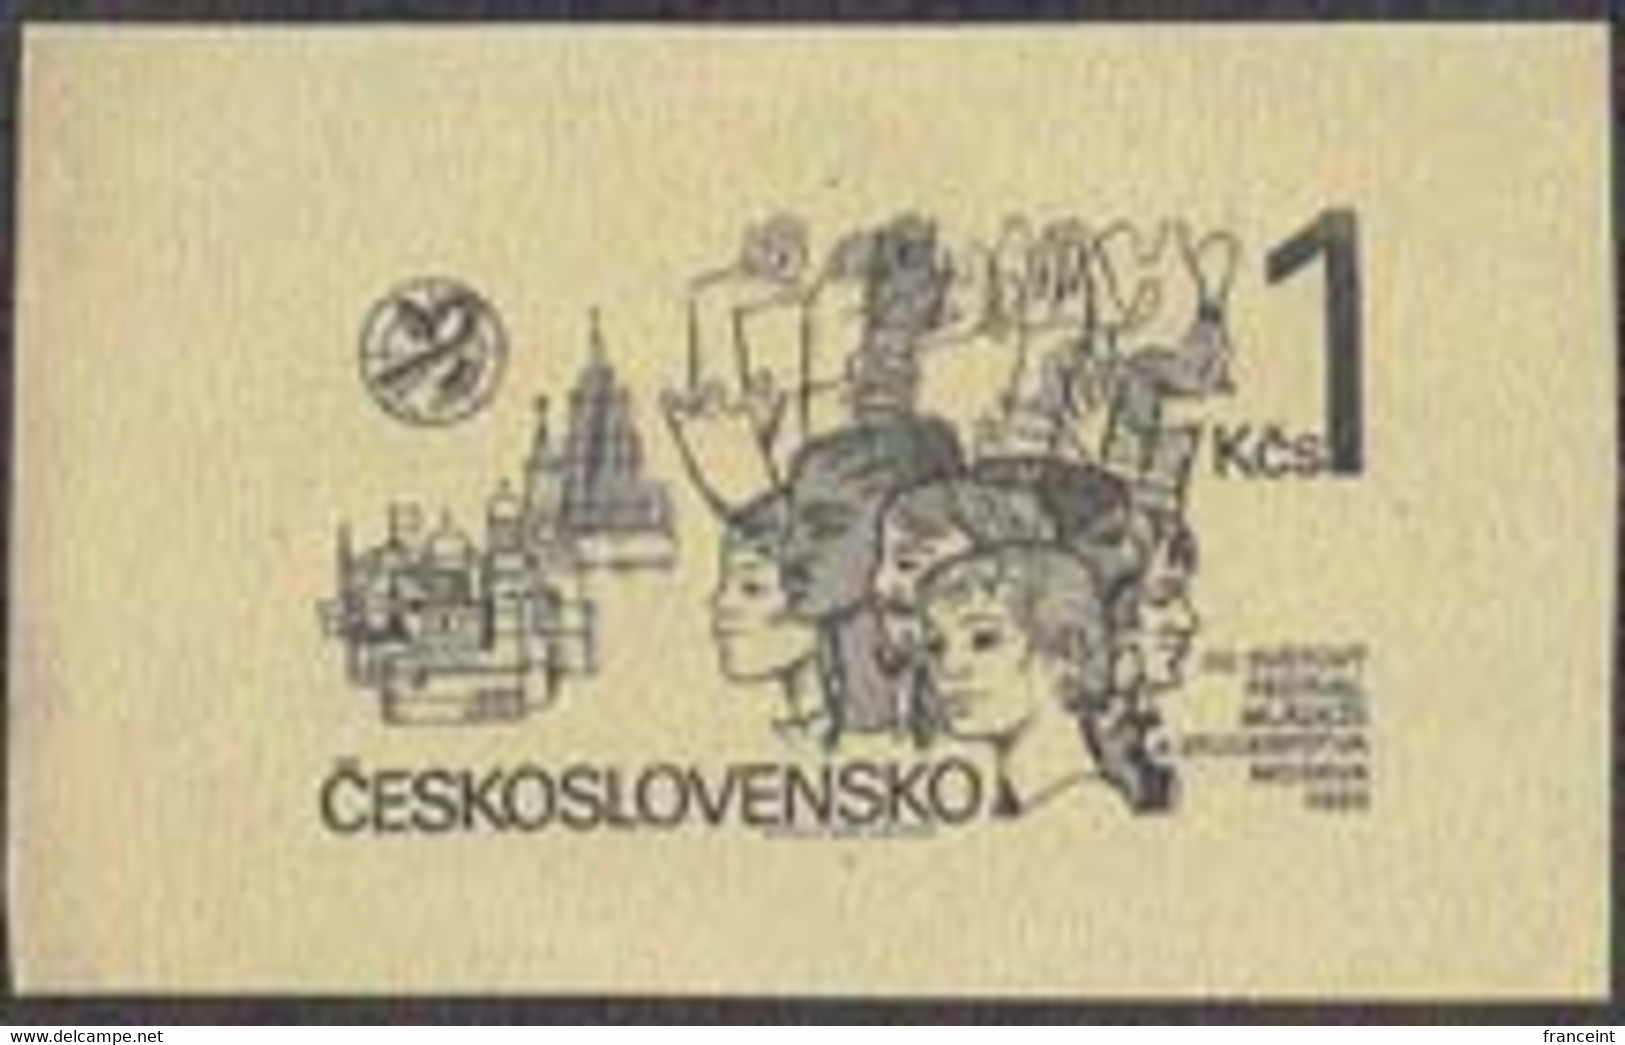 CZECHOSLOVAKIA (1985) Students With Hands Raised. Die Proof In Black. Scott No 2568, Yvert No 2637. - Prove E Ristampe